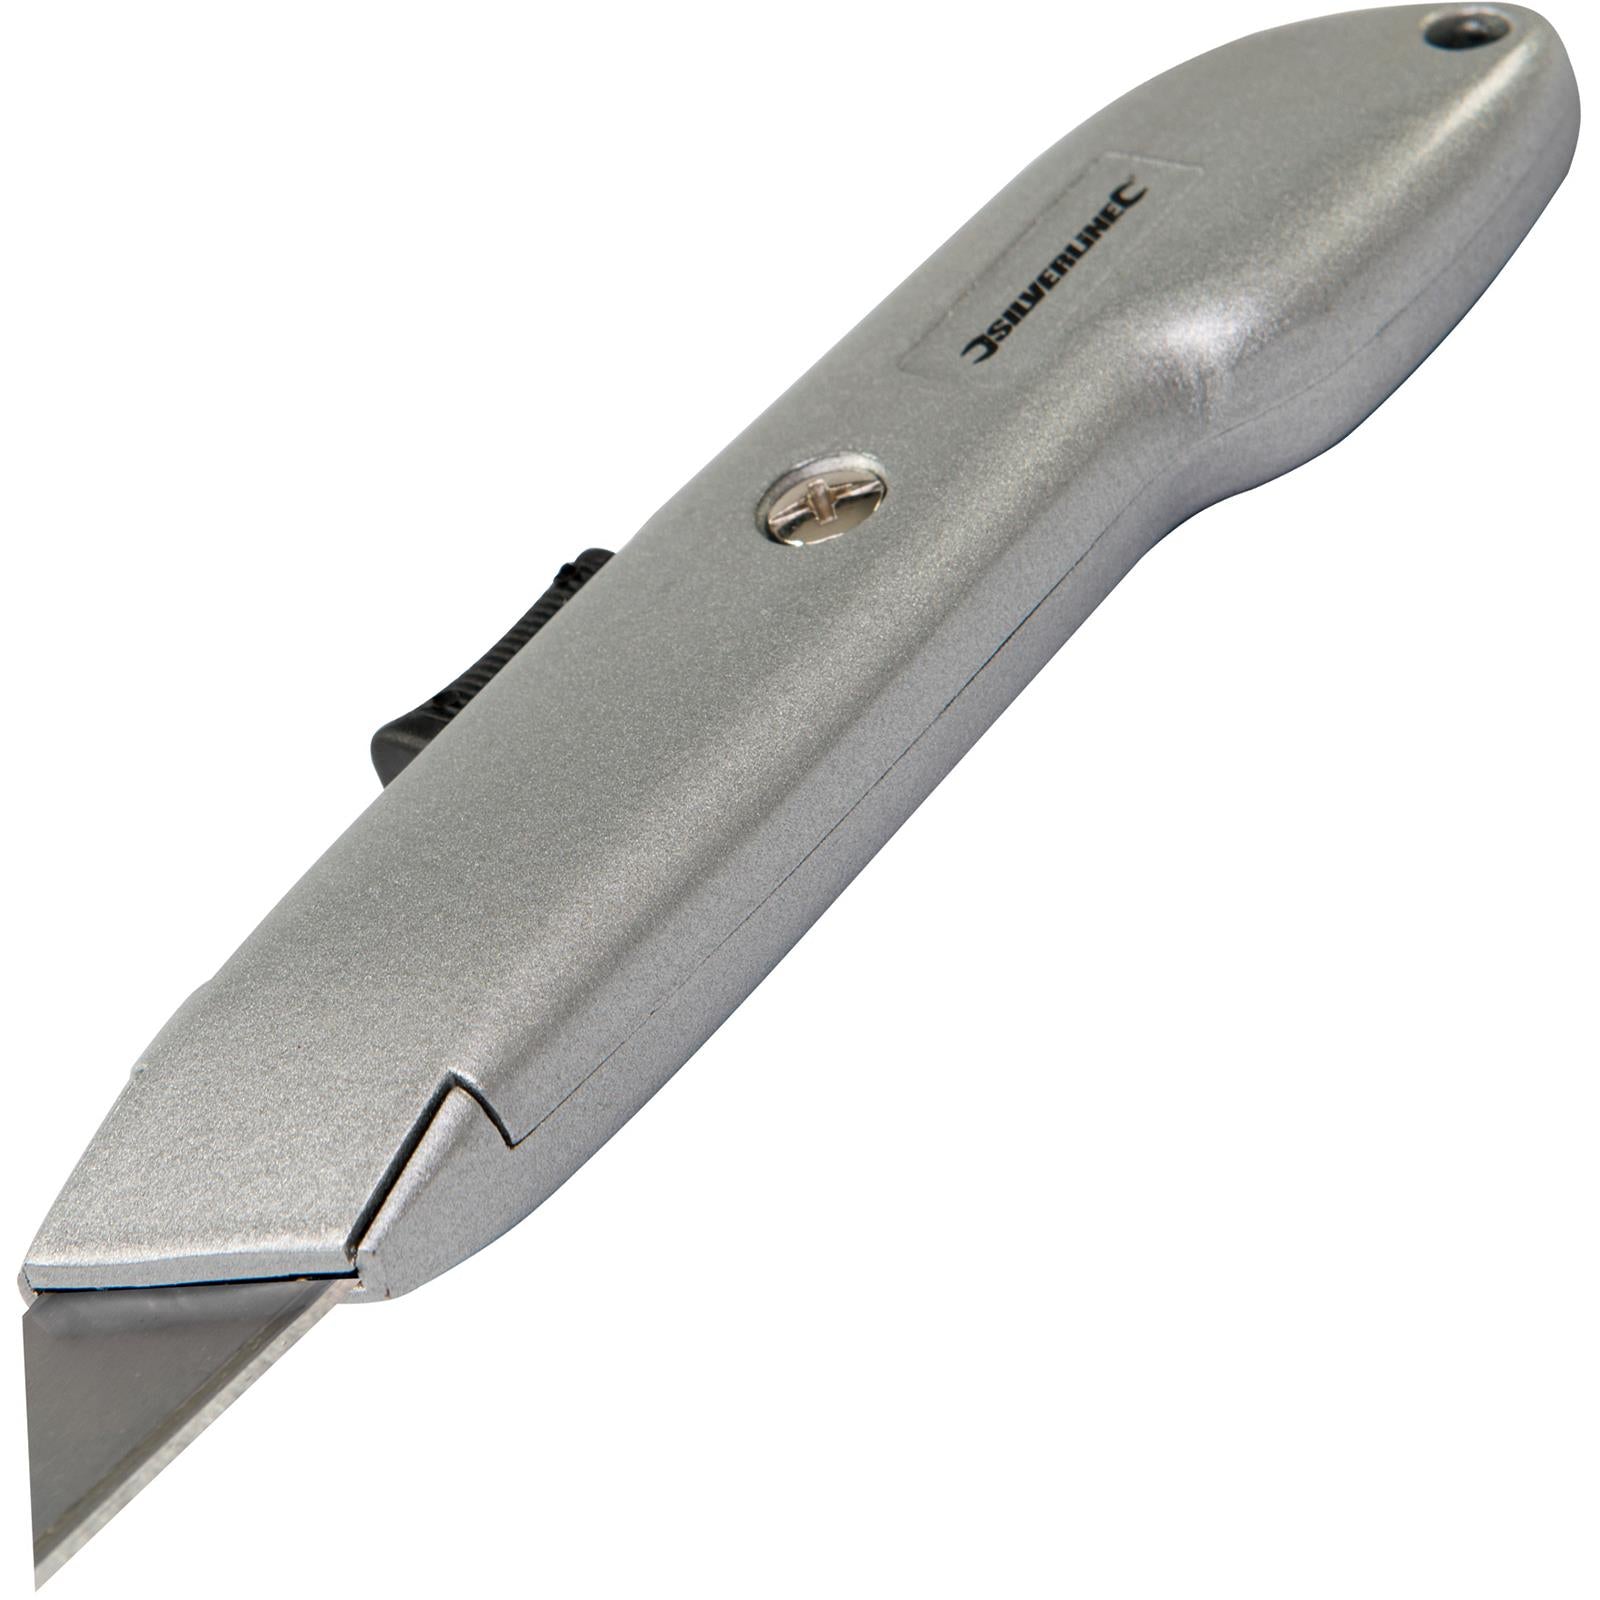 Silverline Automatic Retractable Safety Knife 140mm Cutting Blade